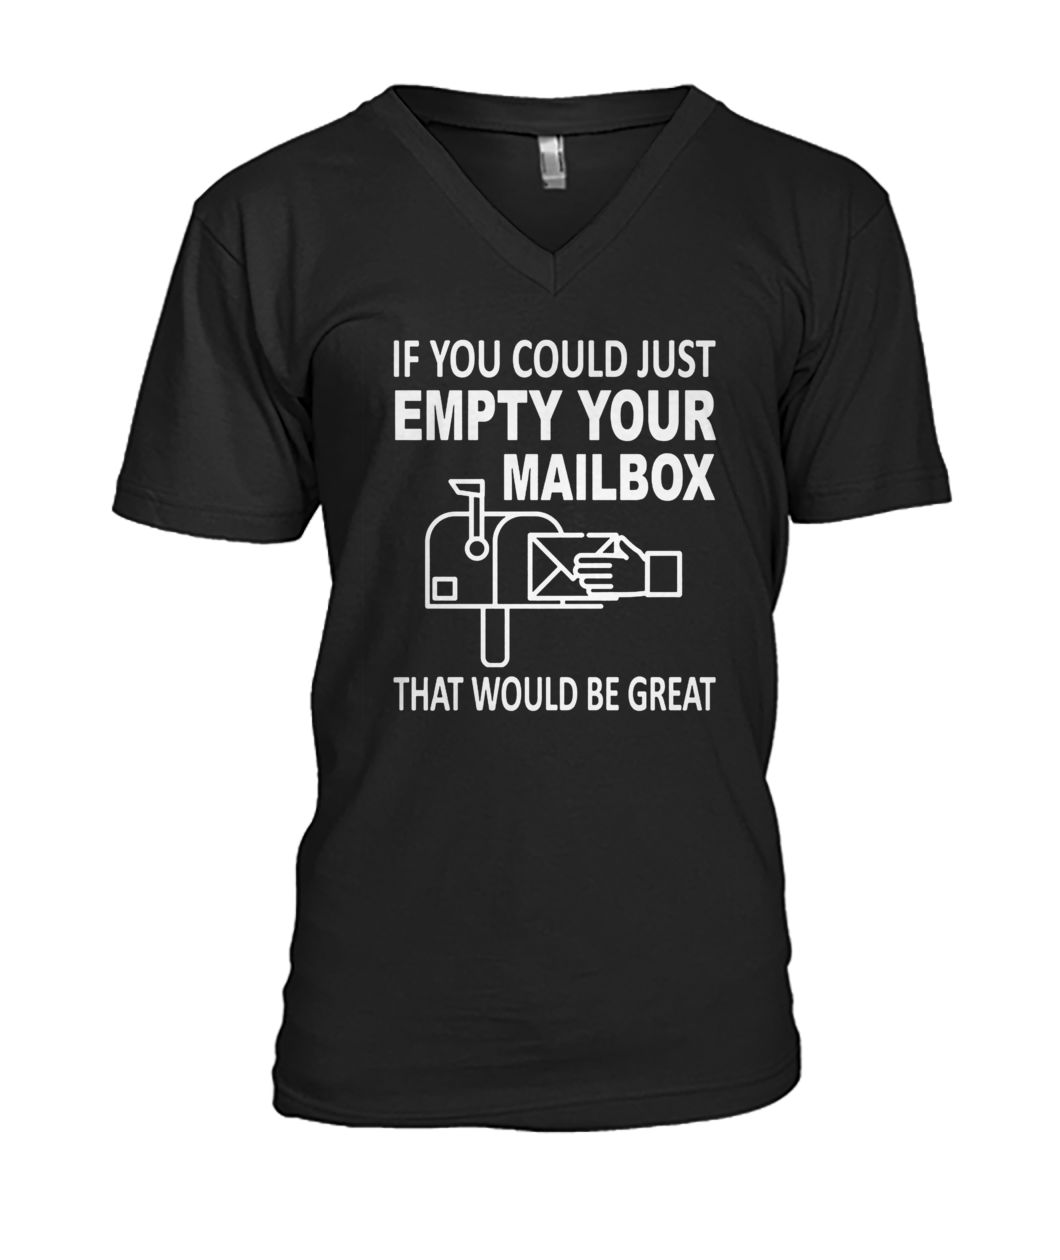 If you could just empty your mailbox that would be great mens v-neck